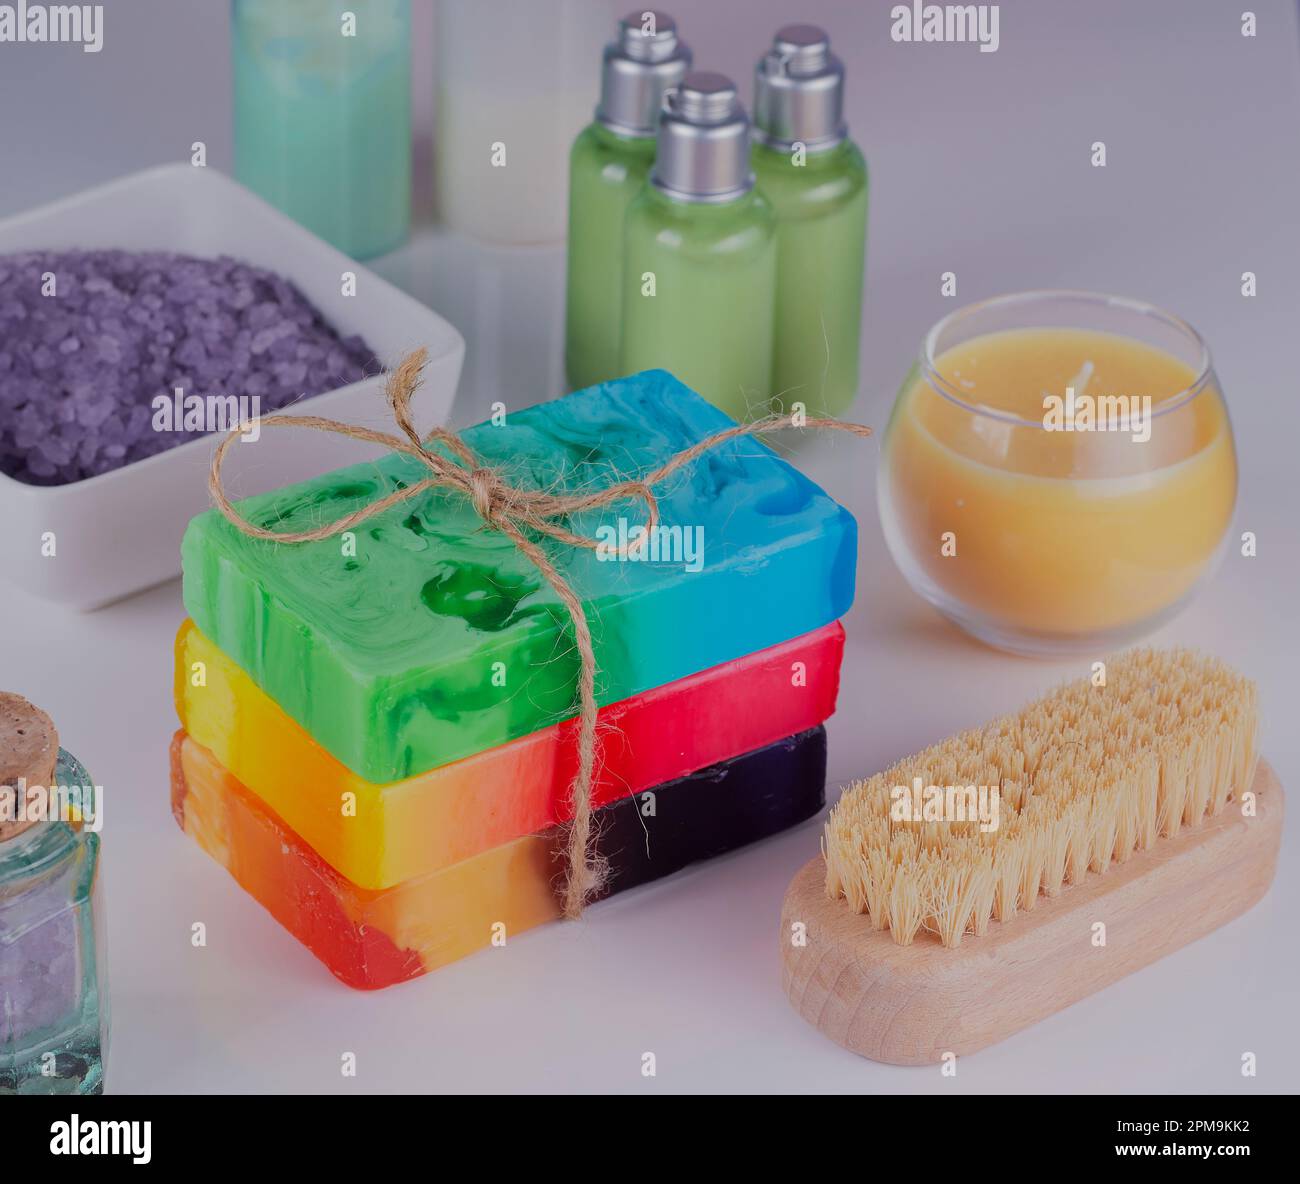 Mixed beauty products on a white bathroom surface. Stock Photo